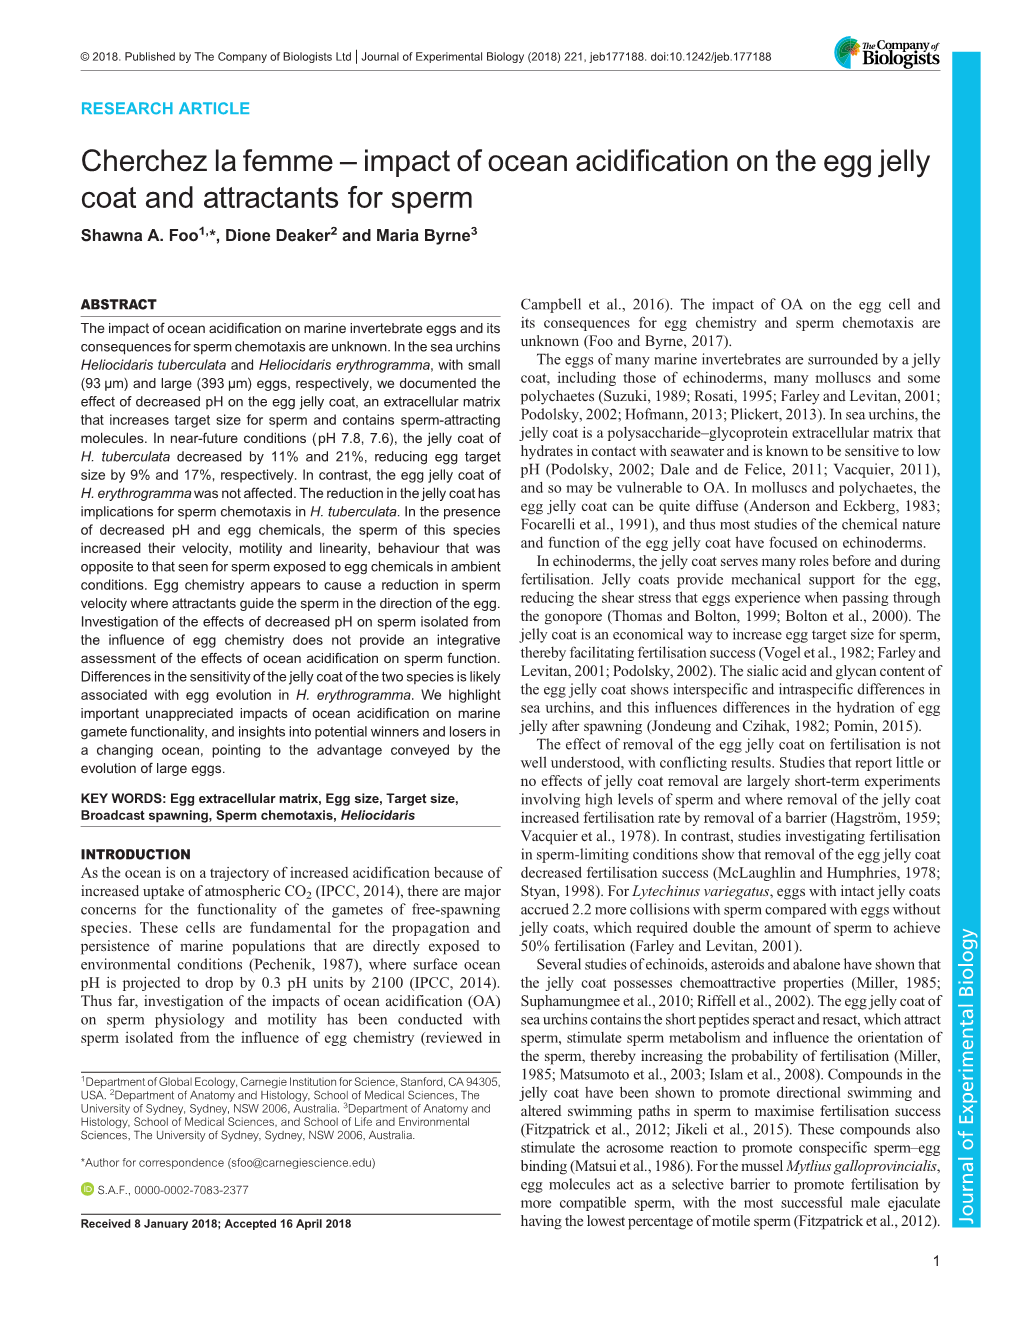 Impact of Ocean Acidification on the Egg Jelly Coat and Attractants for Sperm Shawna A